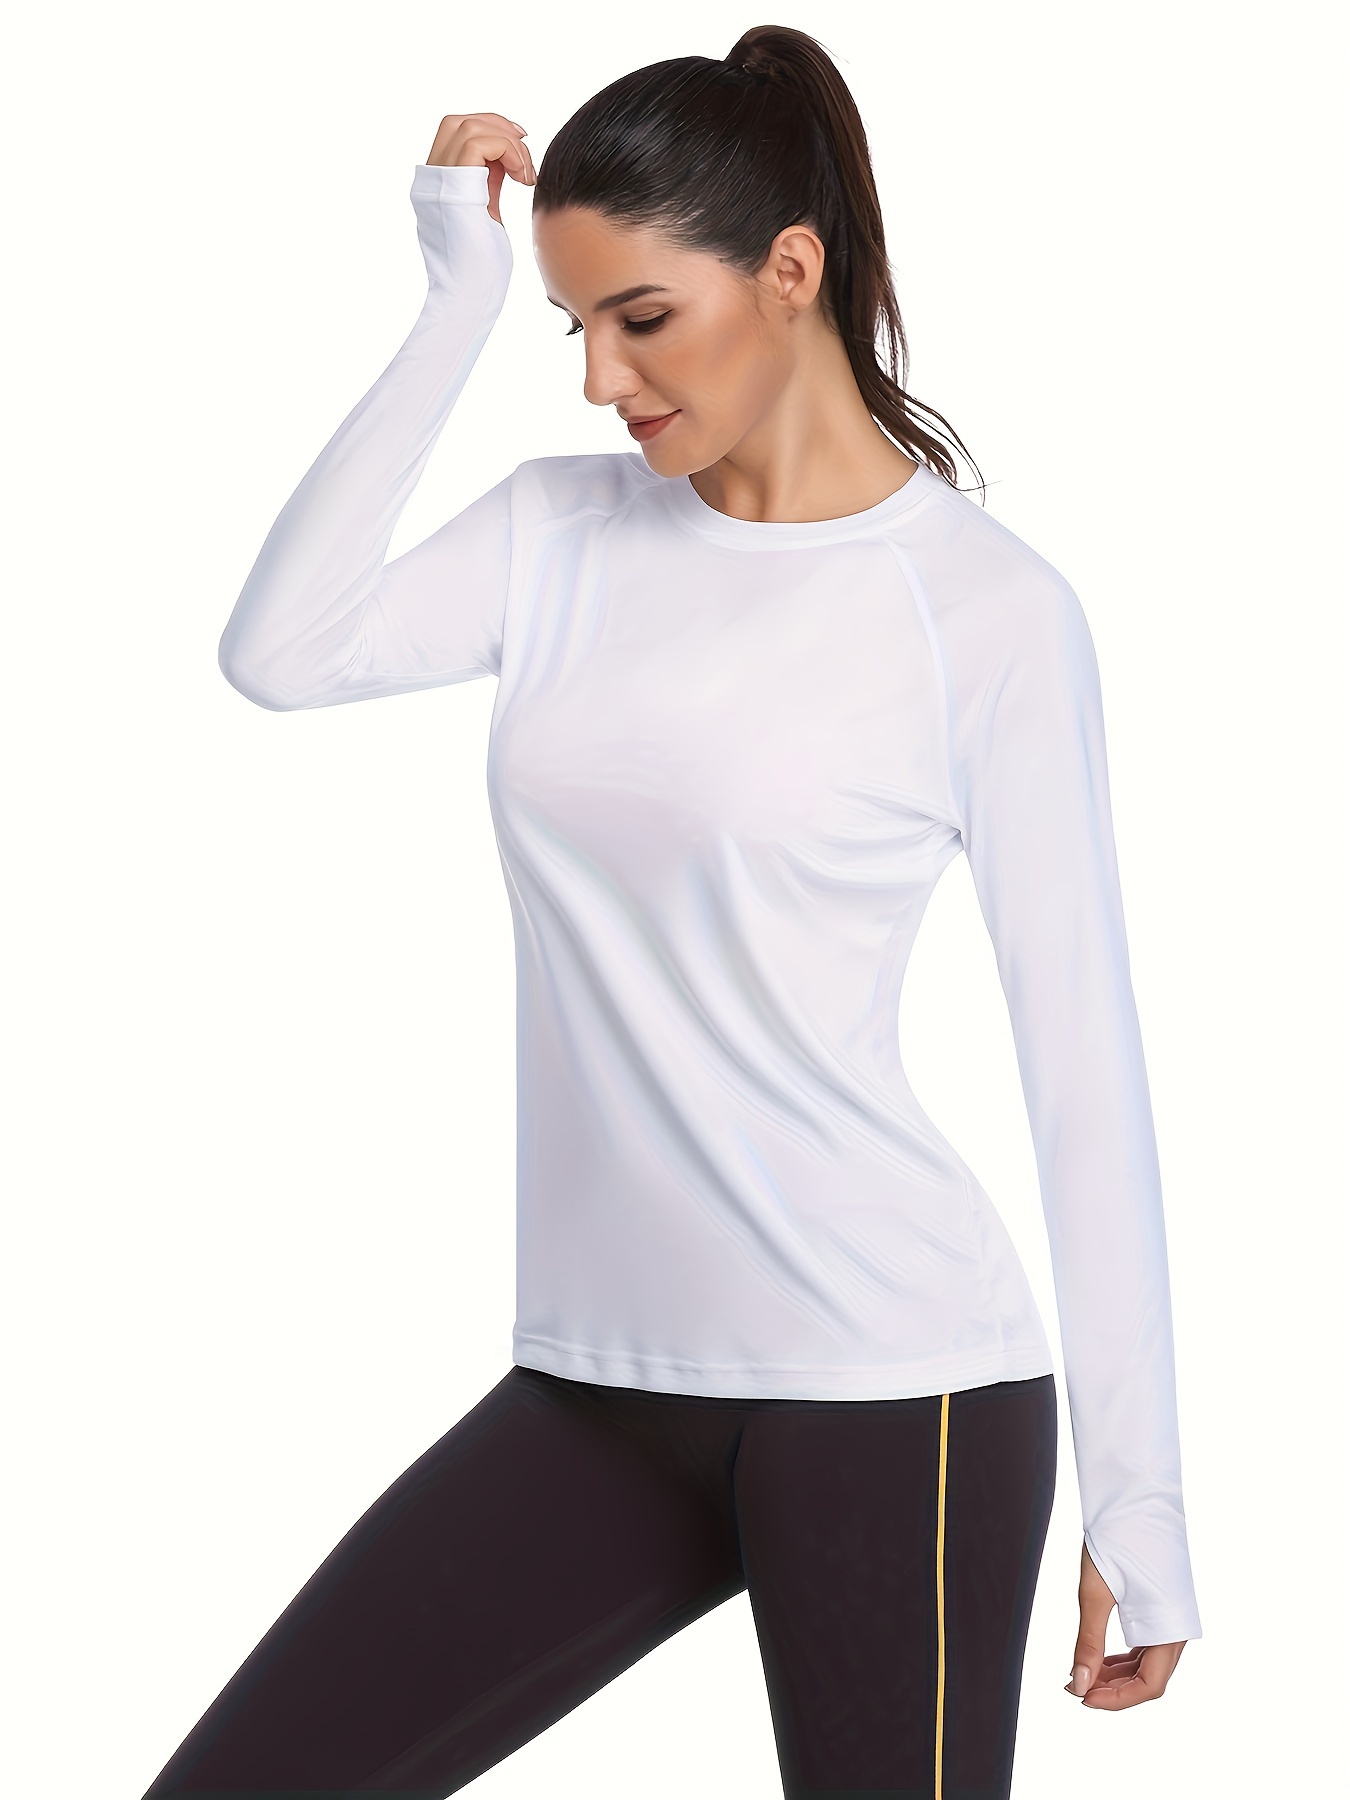  UPF 50+ SPF Sun Fitted Yoga Shirts For Women Long Sleeve  Color Blcok Uv Protection Athletic Light Weight Workout Crew Neck Rash  Guard Outdoor Running Clothing Tops White Small